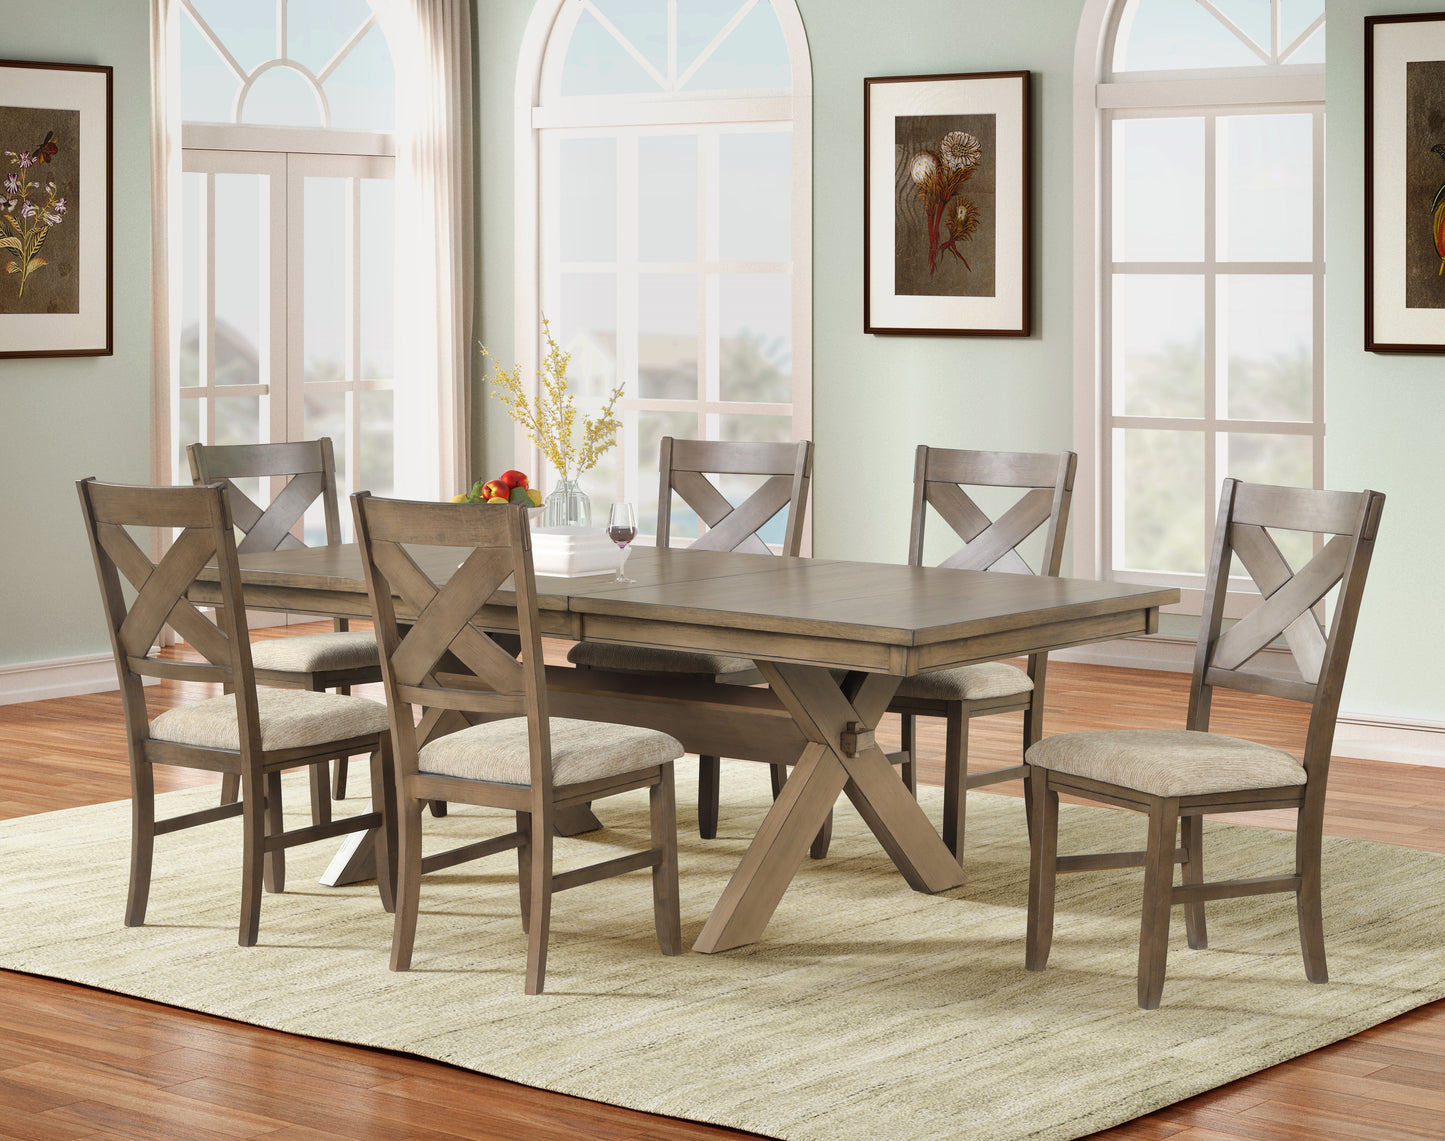 Raven Wood 7-Piece Dining Set, Extendable Trestle Dining Table with 6 Chairs, Glazed Pine Brown